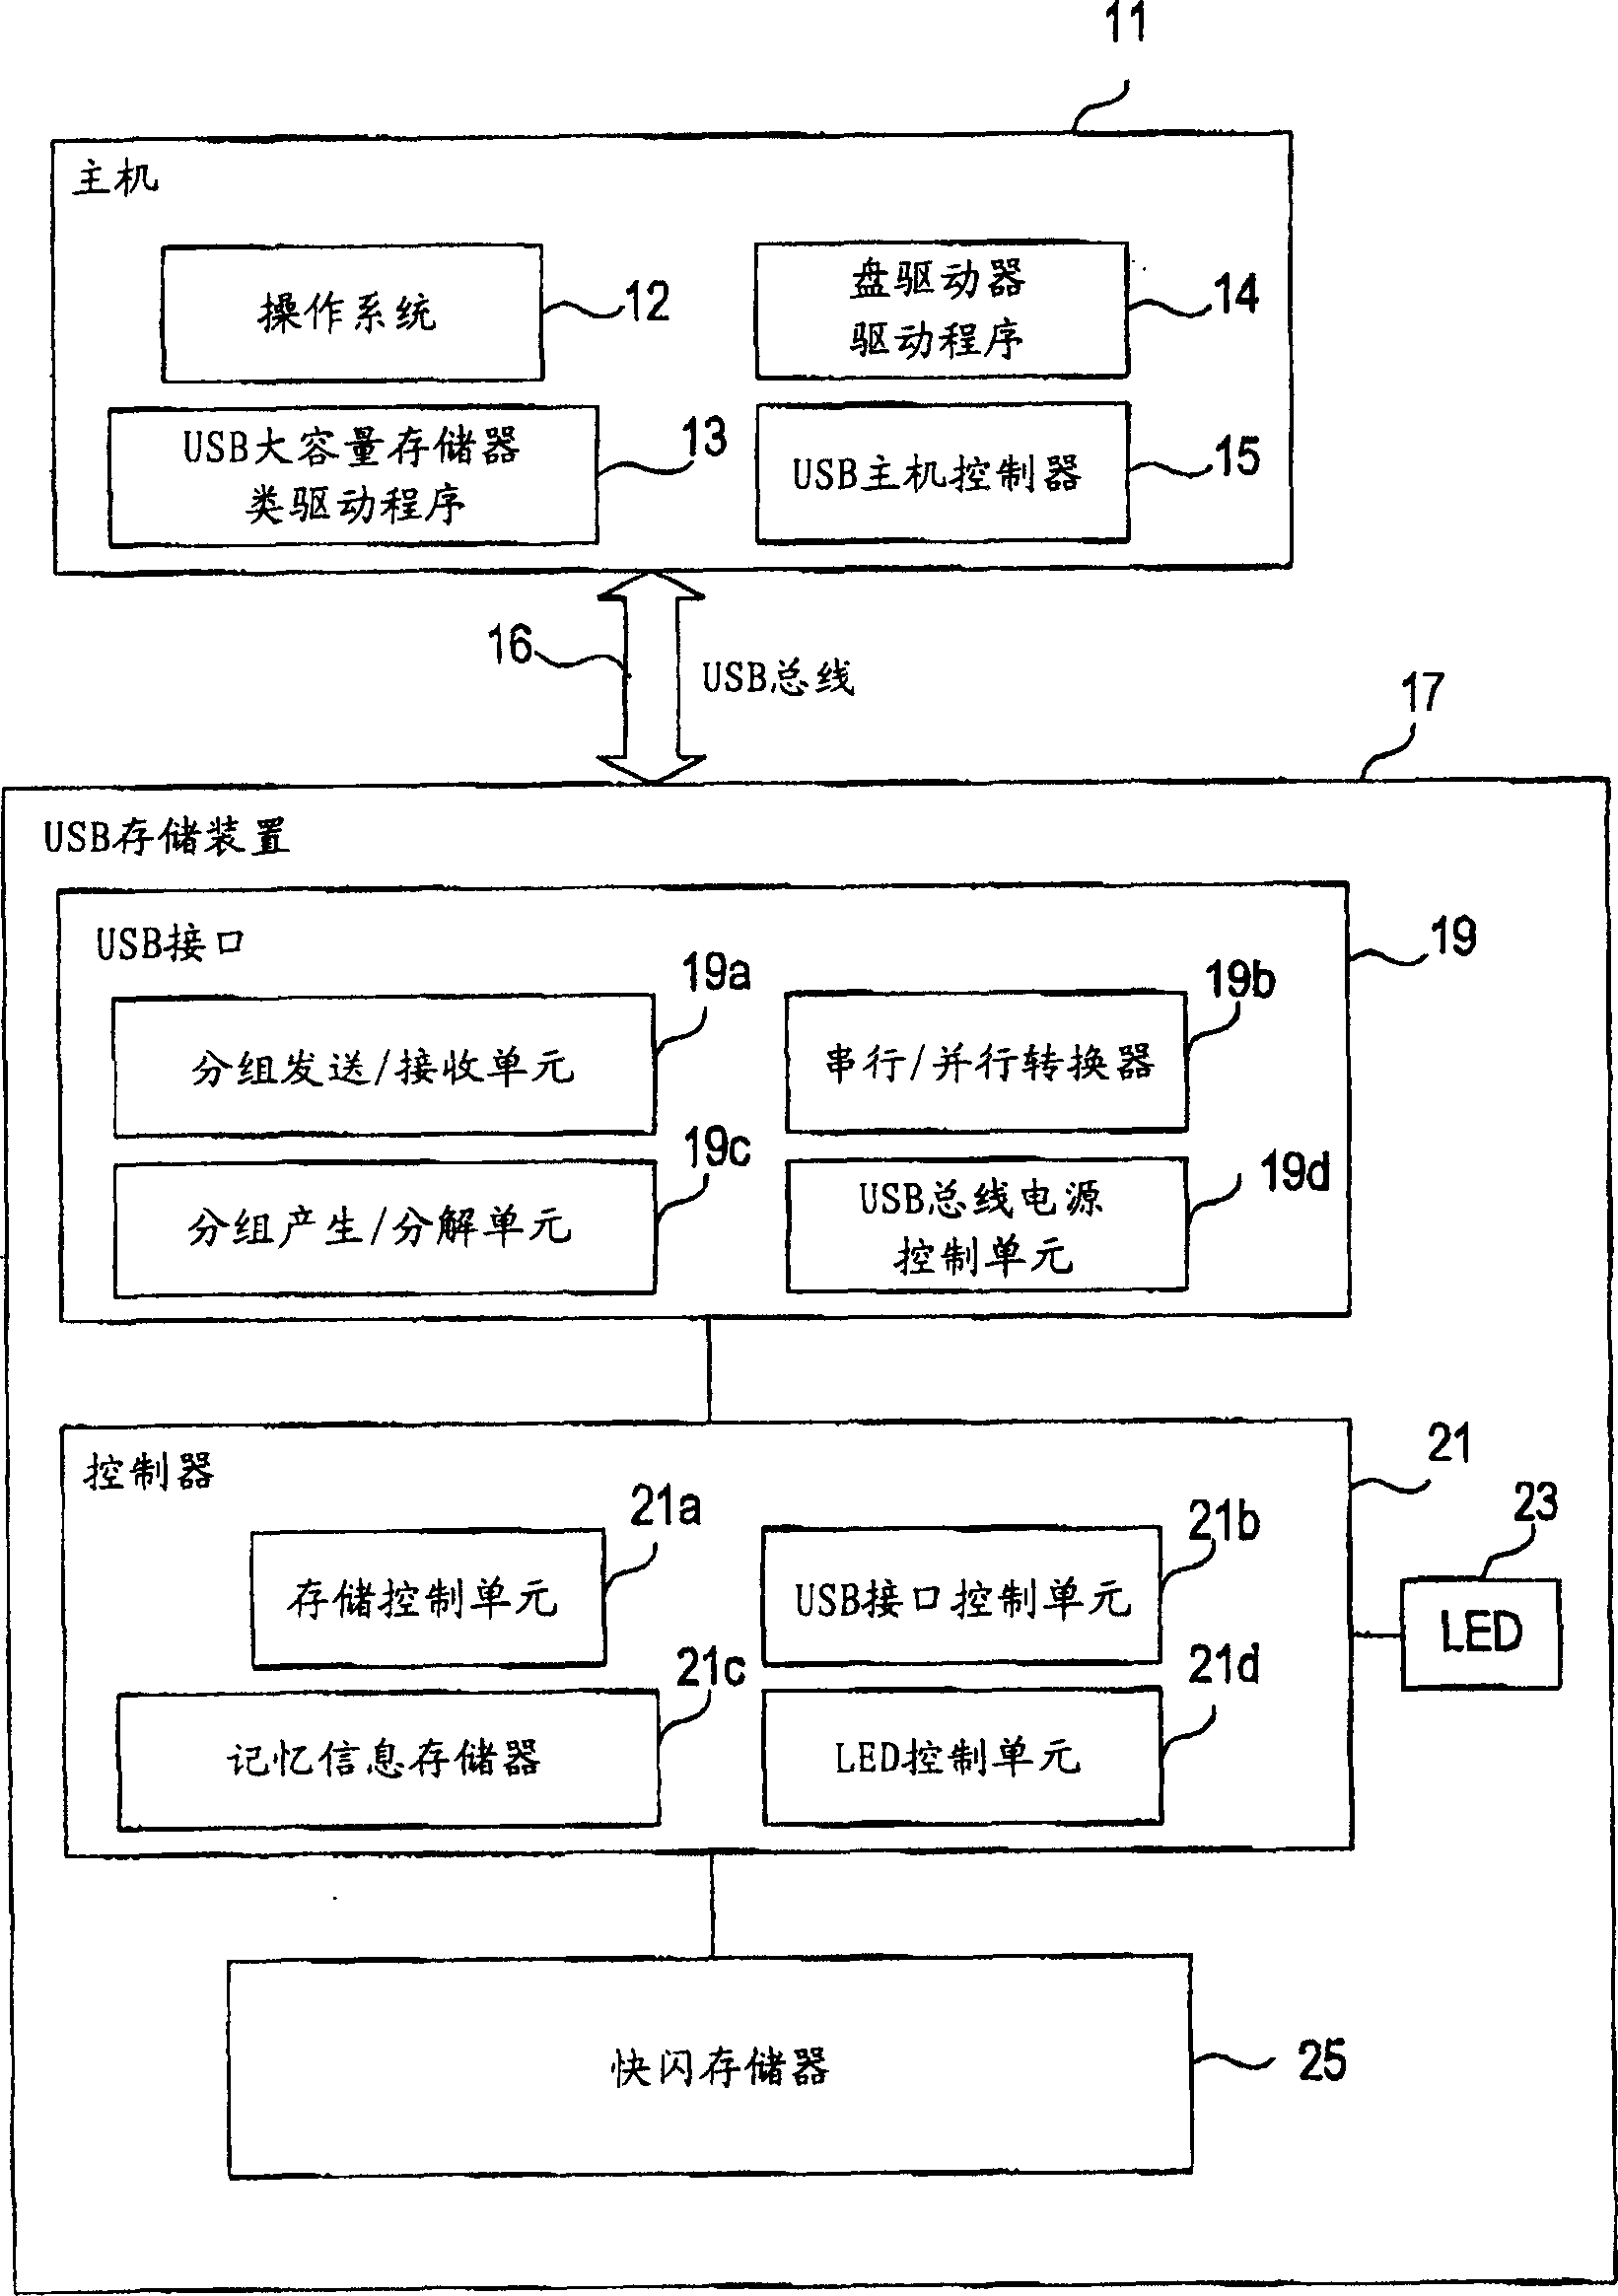 Usb storage device and control device